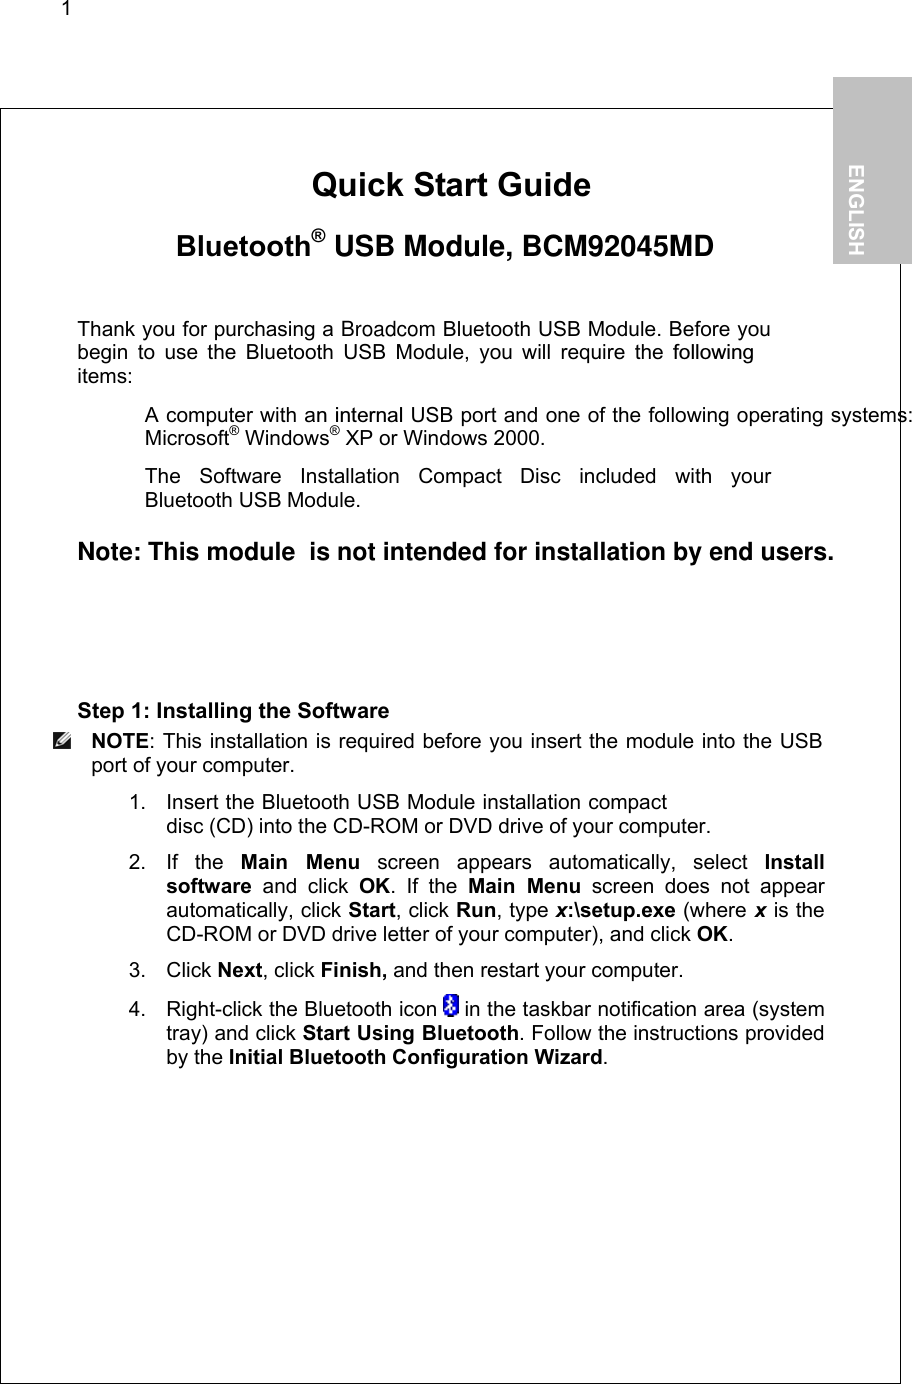 1        Quick Start Guide   Bluetooth® USB Module, BCM92045MD  Thank you for purchasing a Broadcom Bluetooth USB Module. Before you begin to use the Bluetooth USB Module, you will require the followingitems:   A computer with an internal USB port and one of the following operating systems: Microsoft® Windows® XP or Windows 2000.   The Software Installation Compact Disc included with your  Bluetooth USB Module.  Note: This module  is not intended for installation by end users.  Step 1: Installing the Software  NOTE: This installation is required before you insert the module into the USB port of your computer. 1. Insert the Bluetooth USB Module installation compact disc (CD) into the CD-ROM or DVD drive of your computer. 2. If the Main Menu screen appears automatically, select Install software and click OK. If the Main Menu screen does not appear automatically, click Start, click Run, type x:\setup.exe (where x is the CD-ROM or DVD drive letter of your computer), and click OK. 3. Click Next, click Finish, and then restart your computer. 4.  Right-click the Bluetooth icon   in the taskbar notification area (system tray) and click Start Using Bluetooth. Follow the instructions provided by the Initial Bluetooth Configuration Wizard.   1.           ENGLISH  